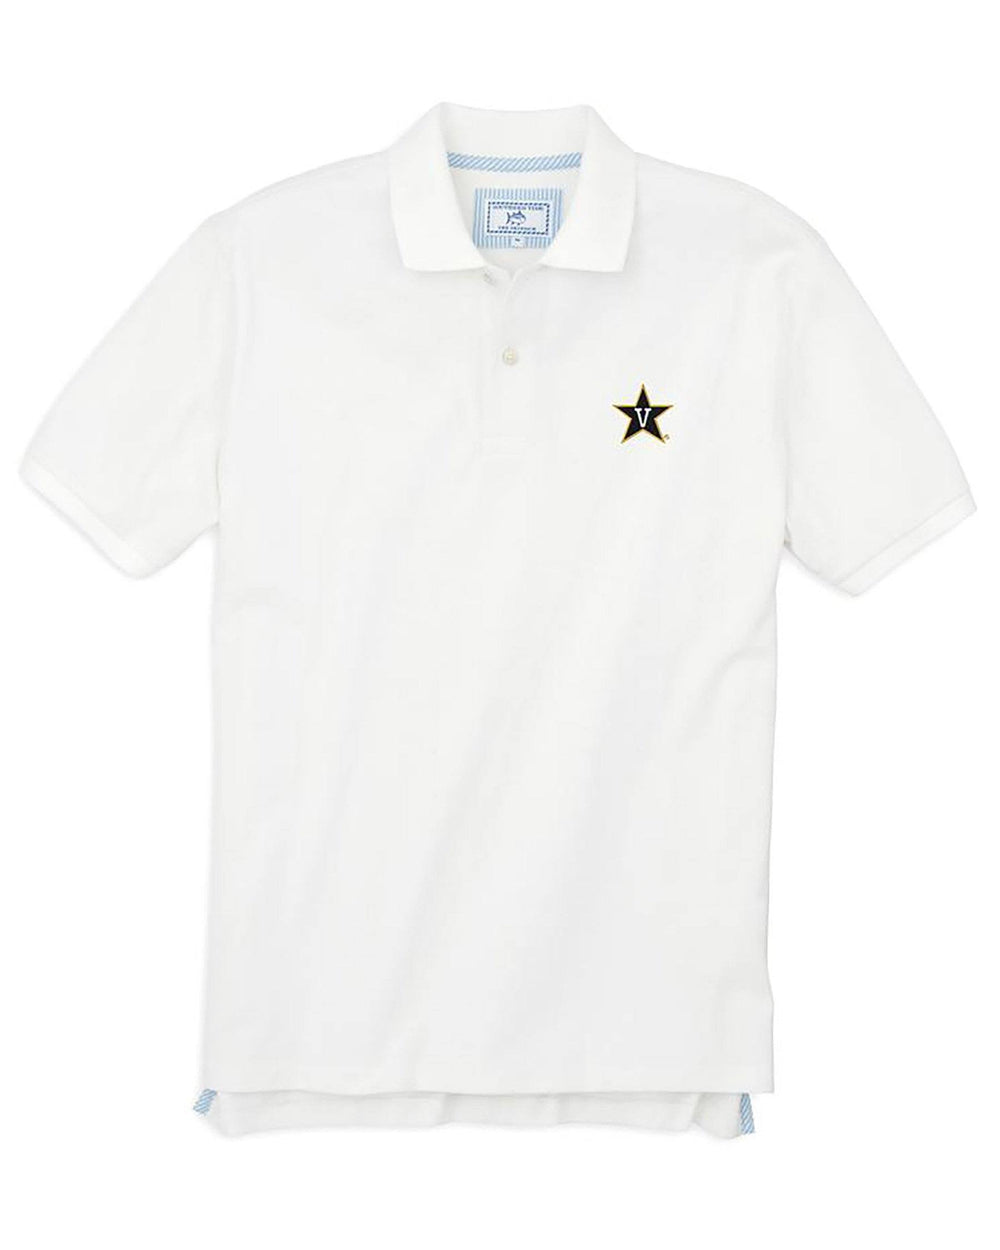 The front view of the Men's White Vanderbilt Pique Polo Shirt by Southern Tide - Classic White